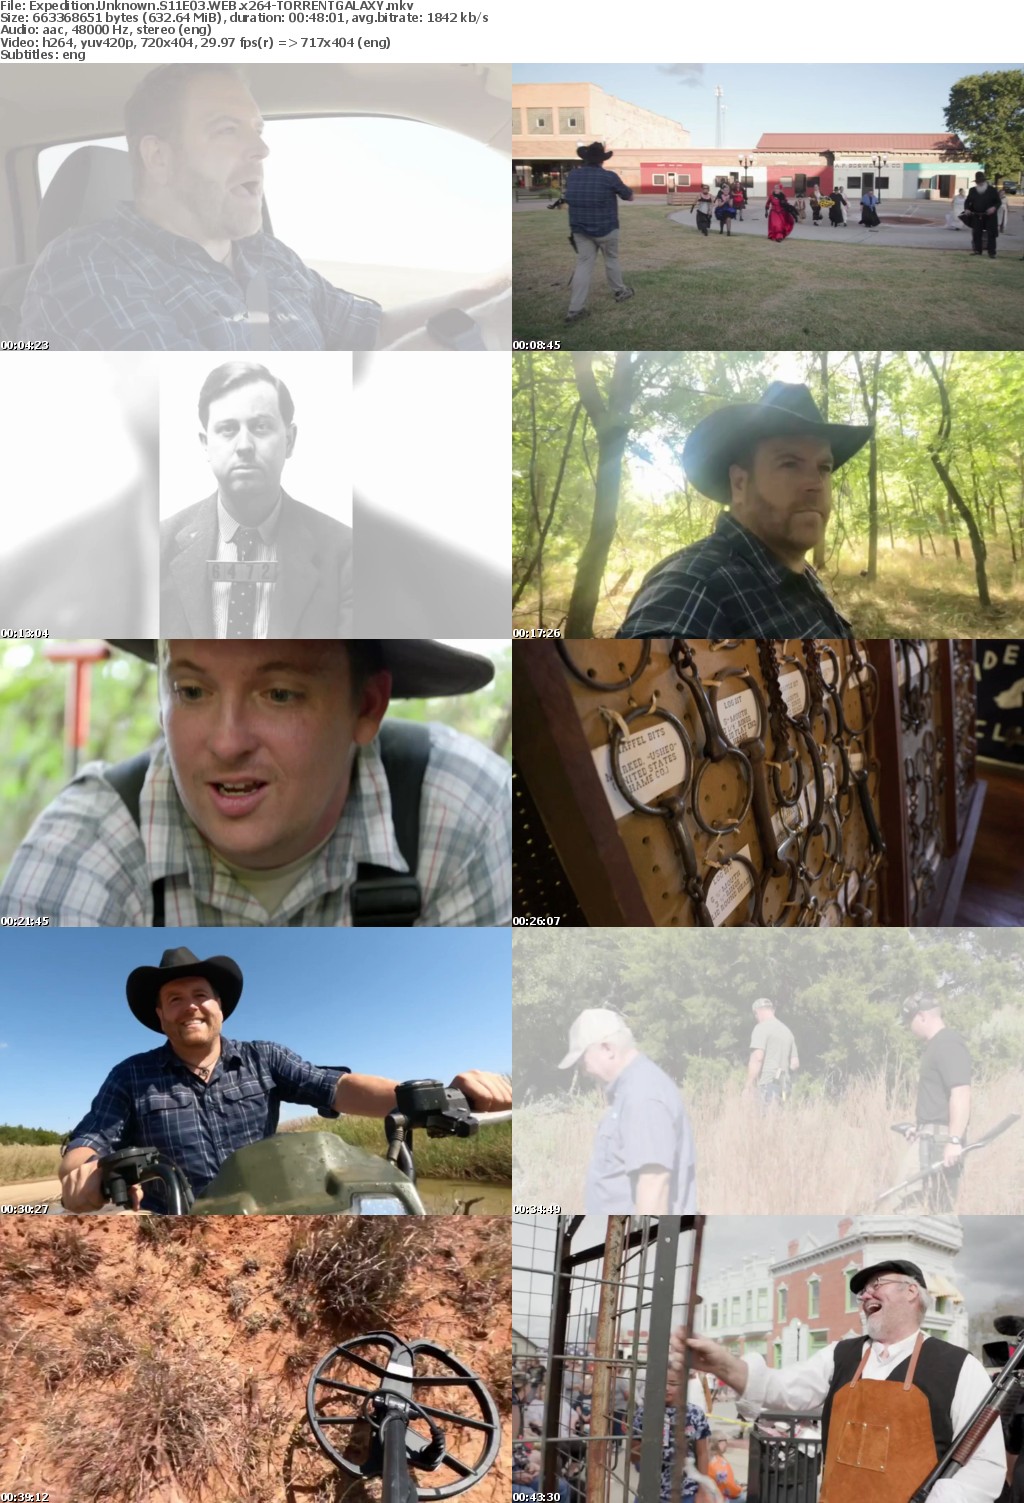 Expedition Unknown S11E03 WEB x264-GALAXY